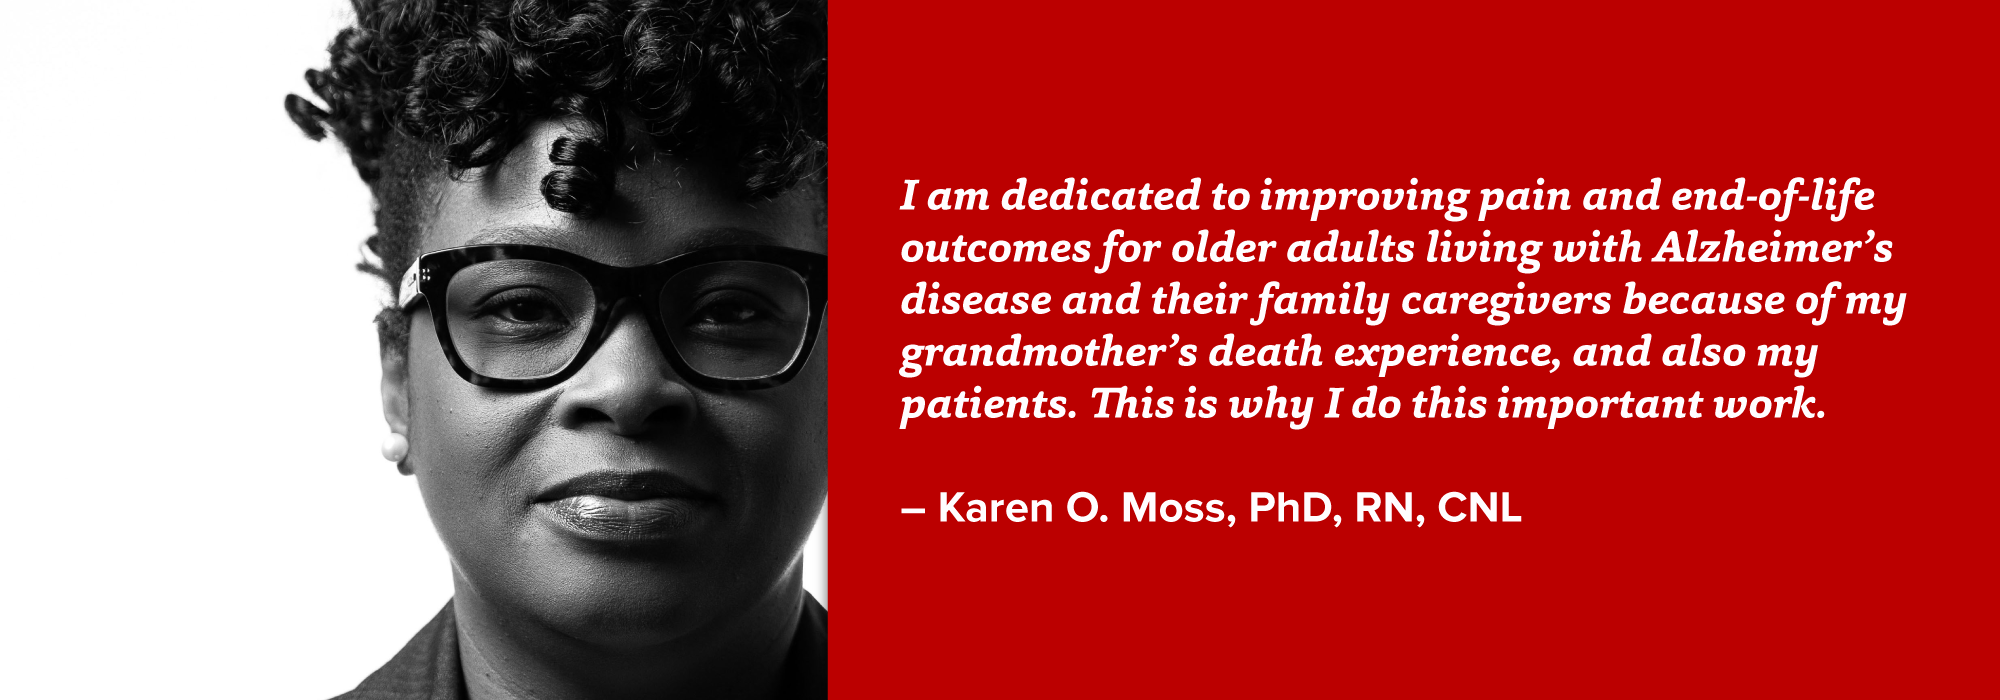 portrait of Karen Moss with quote: I am dedicated to improving pain and end-of-life outcomes for older adults living with Alzheimer’s disease and their family caregivers because of my grandmother’s death experience, and also my patients. This is why I do this important work.  – Karen O. Moss, PhD, RN, CNL